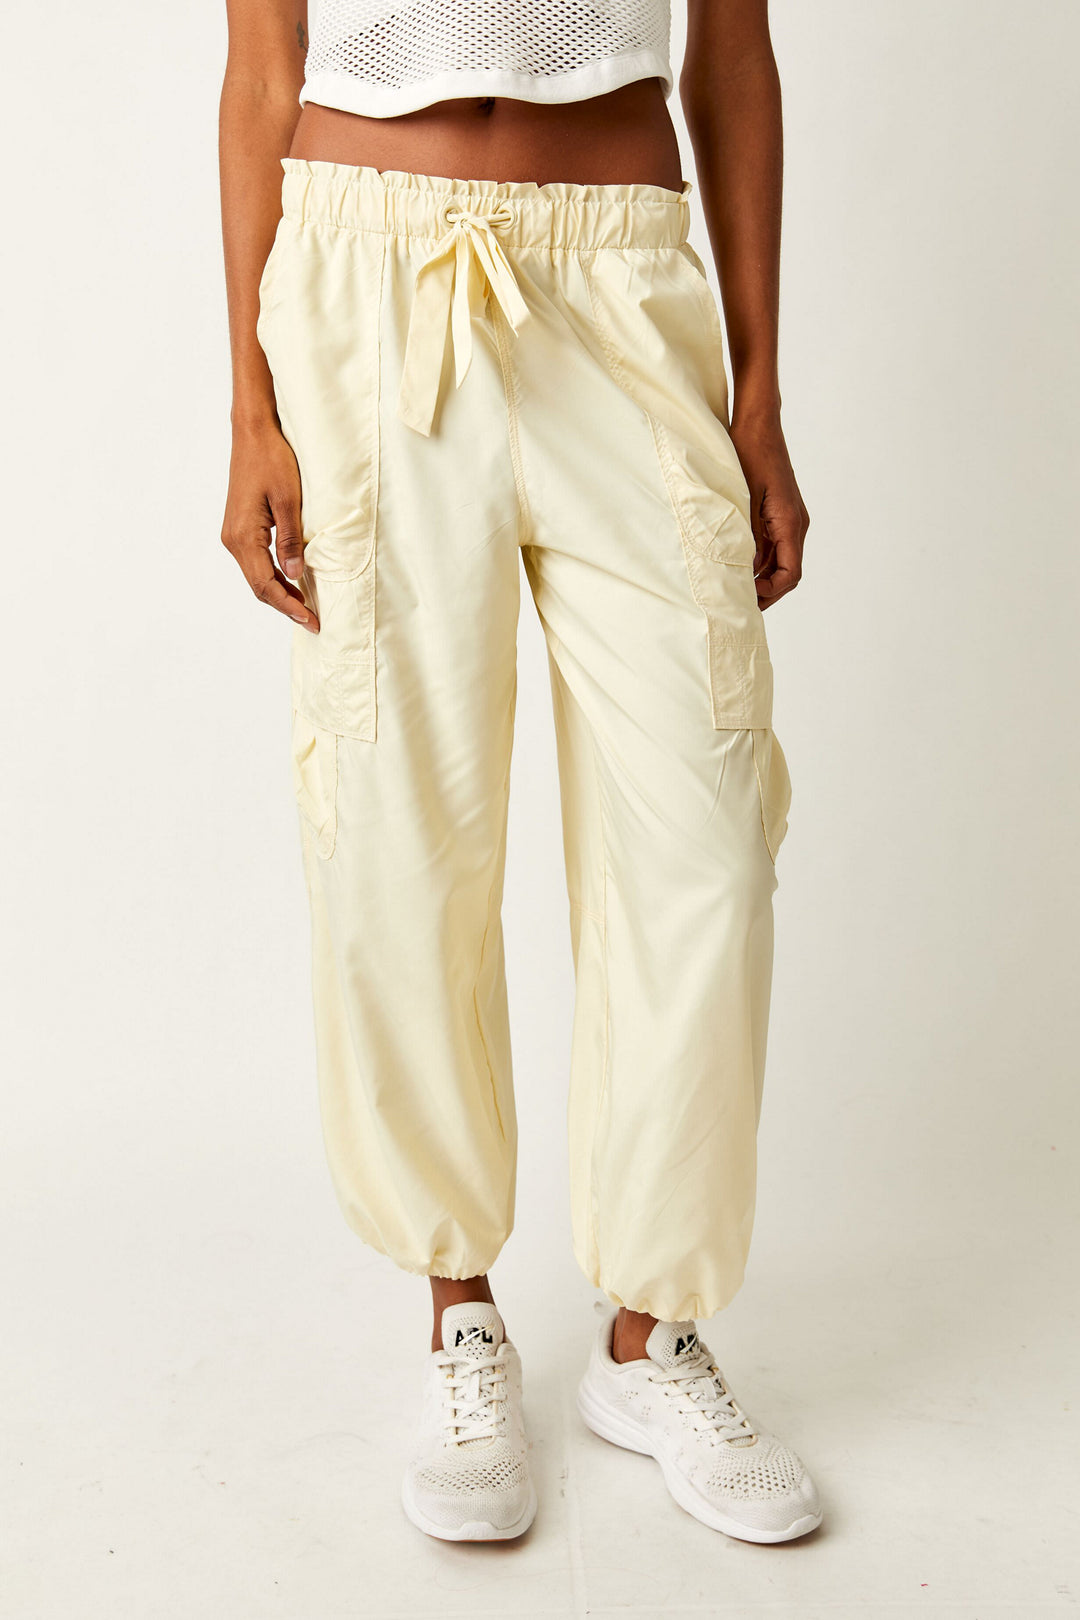 Free People Movement Down To Earth Pant in Banana – Sugar & Spice